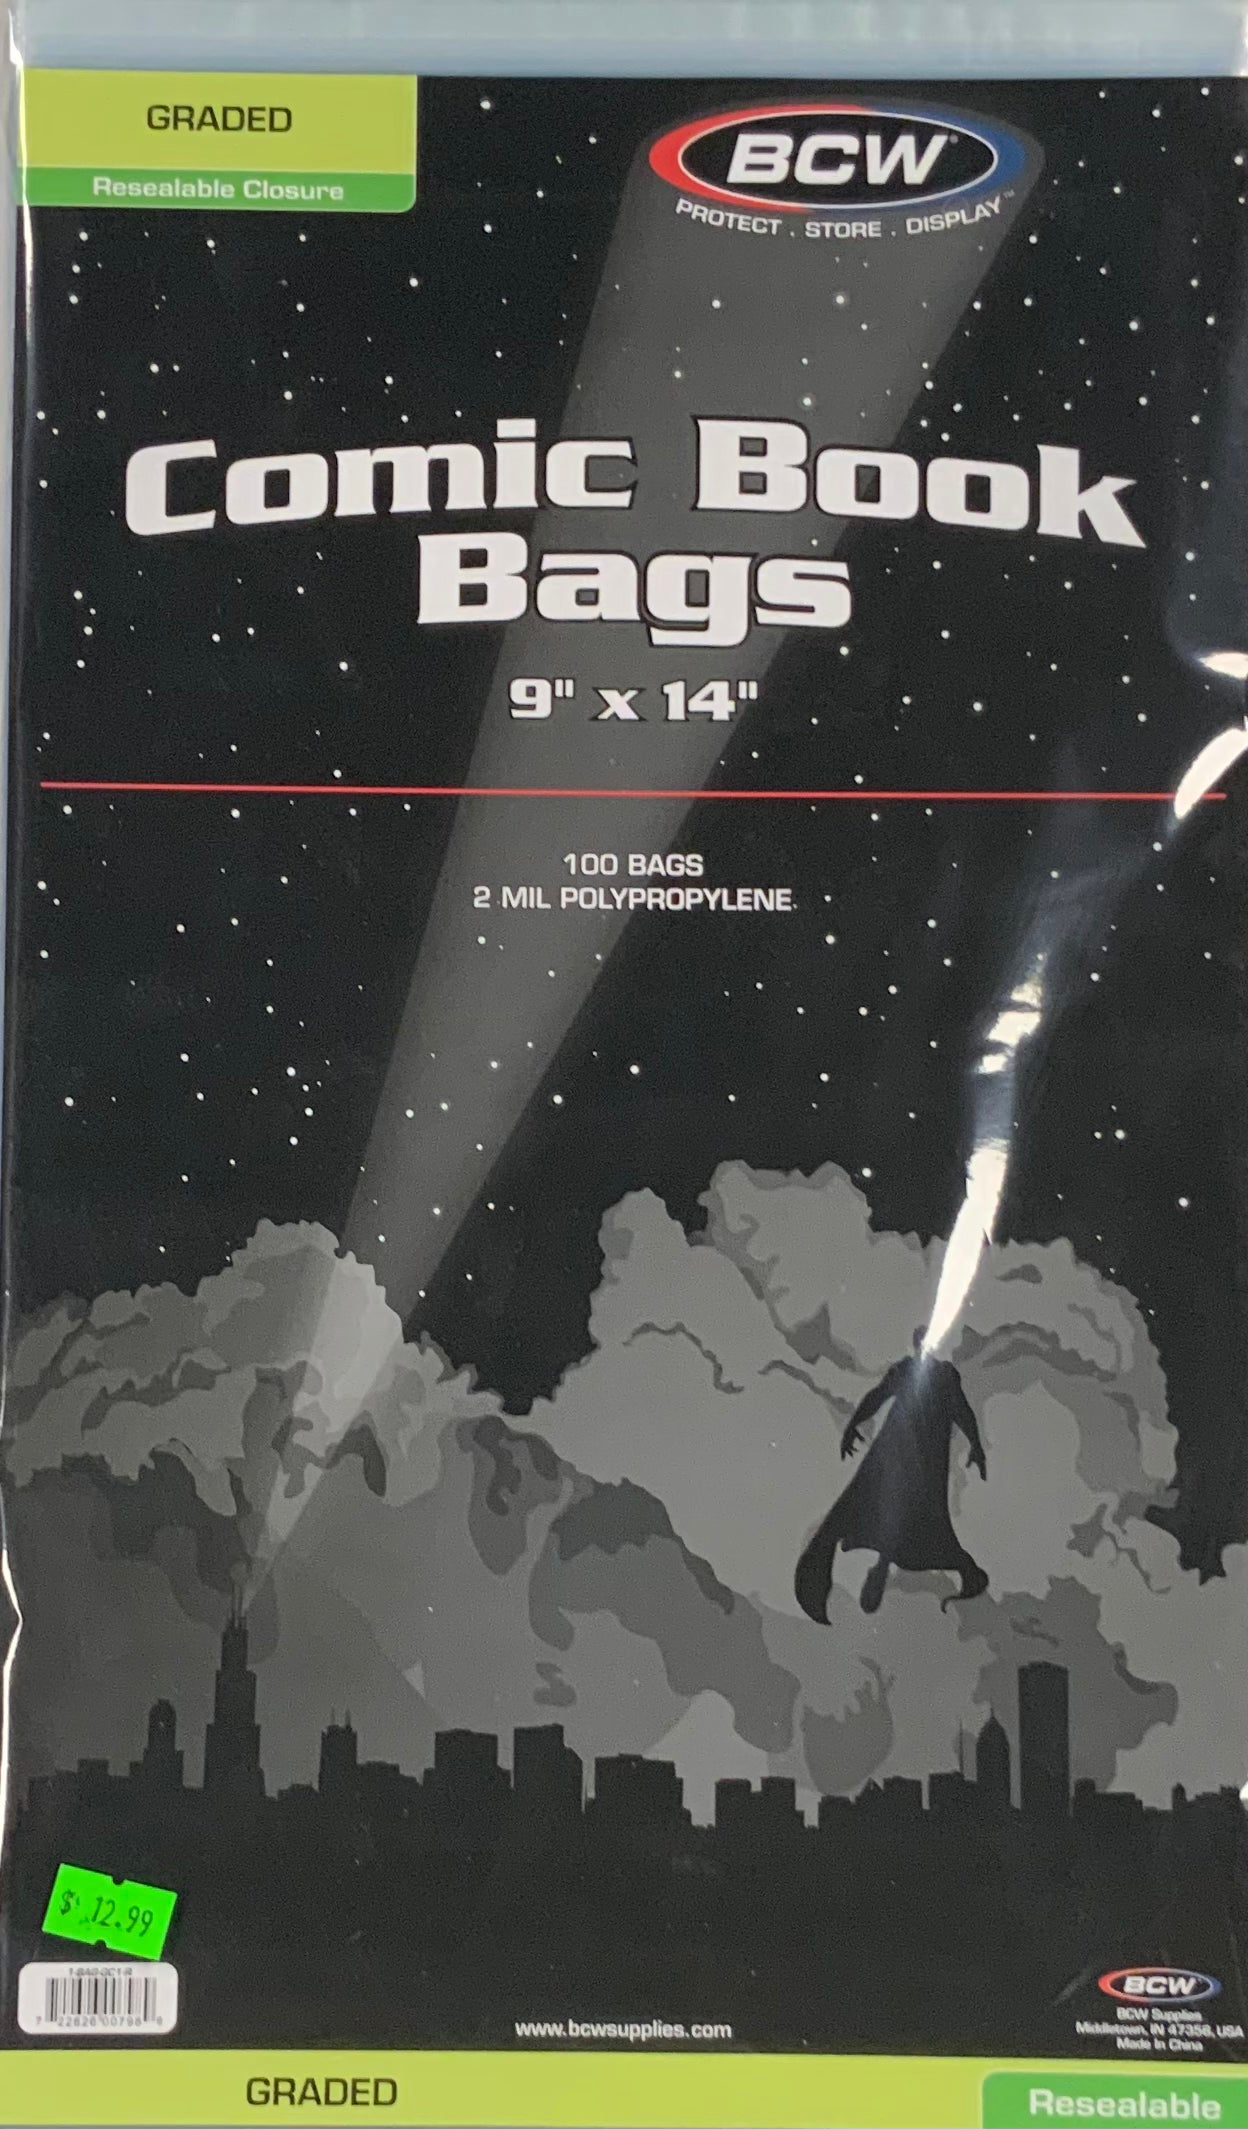 BCW Comic Book Bags - Graded size